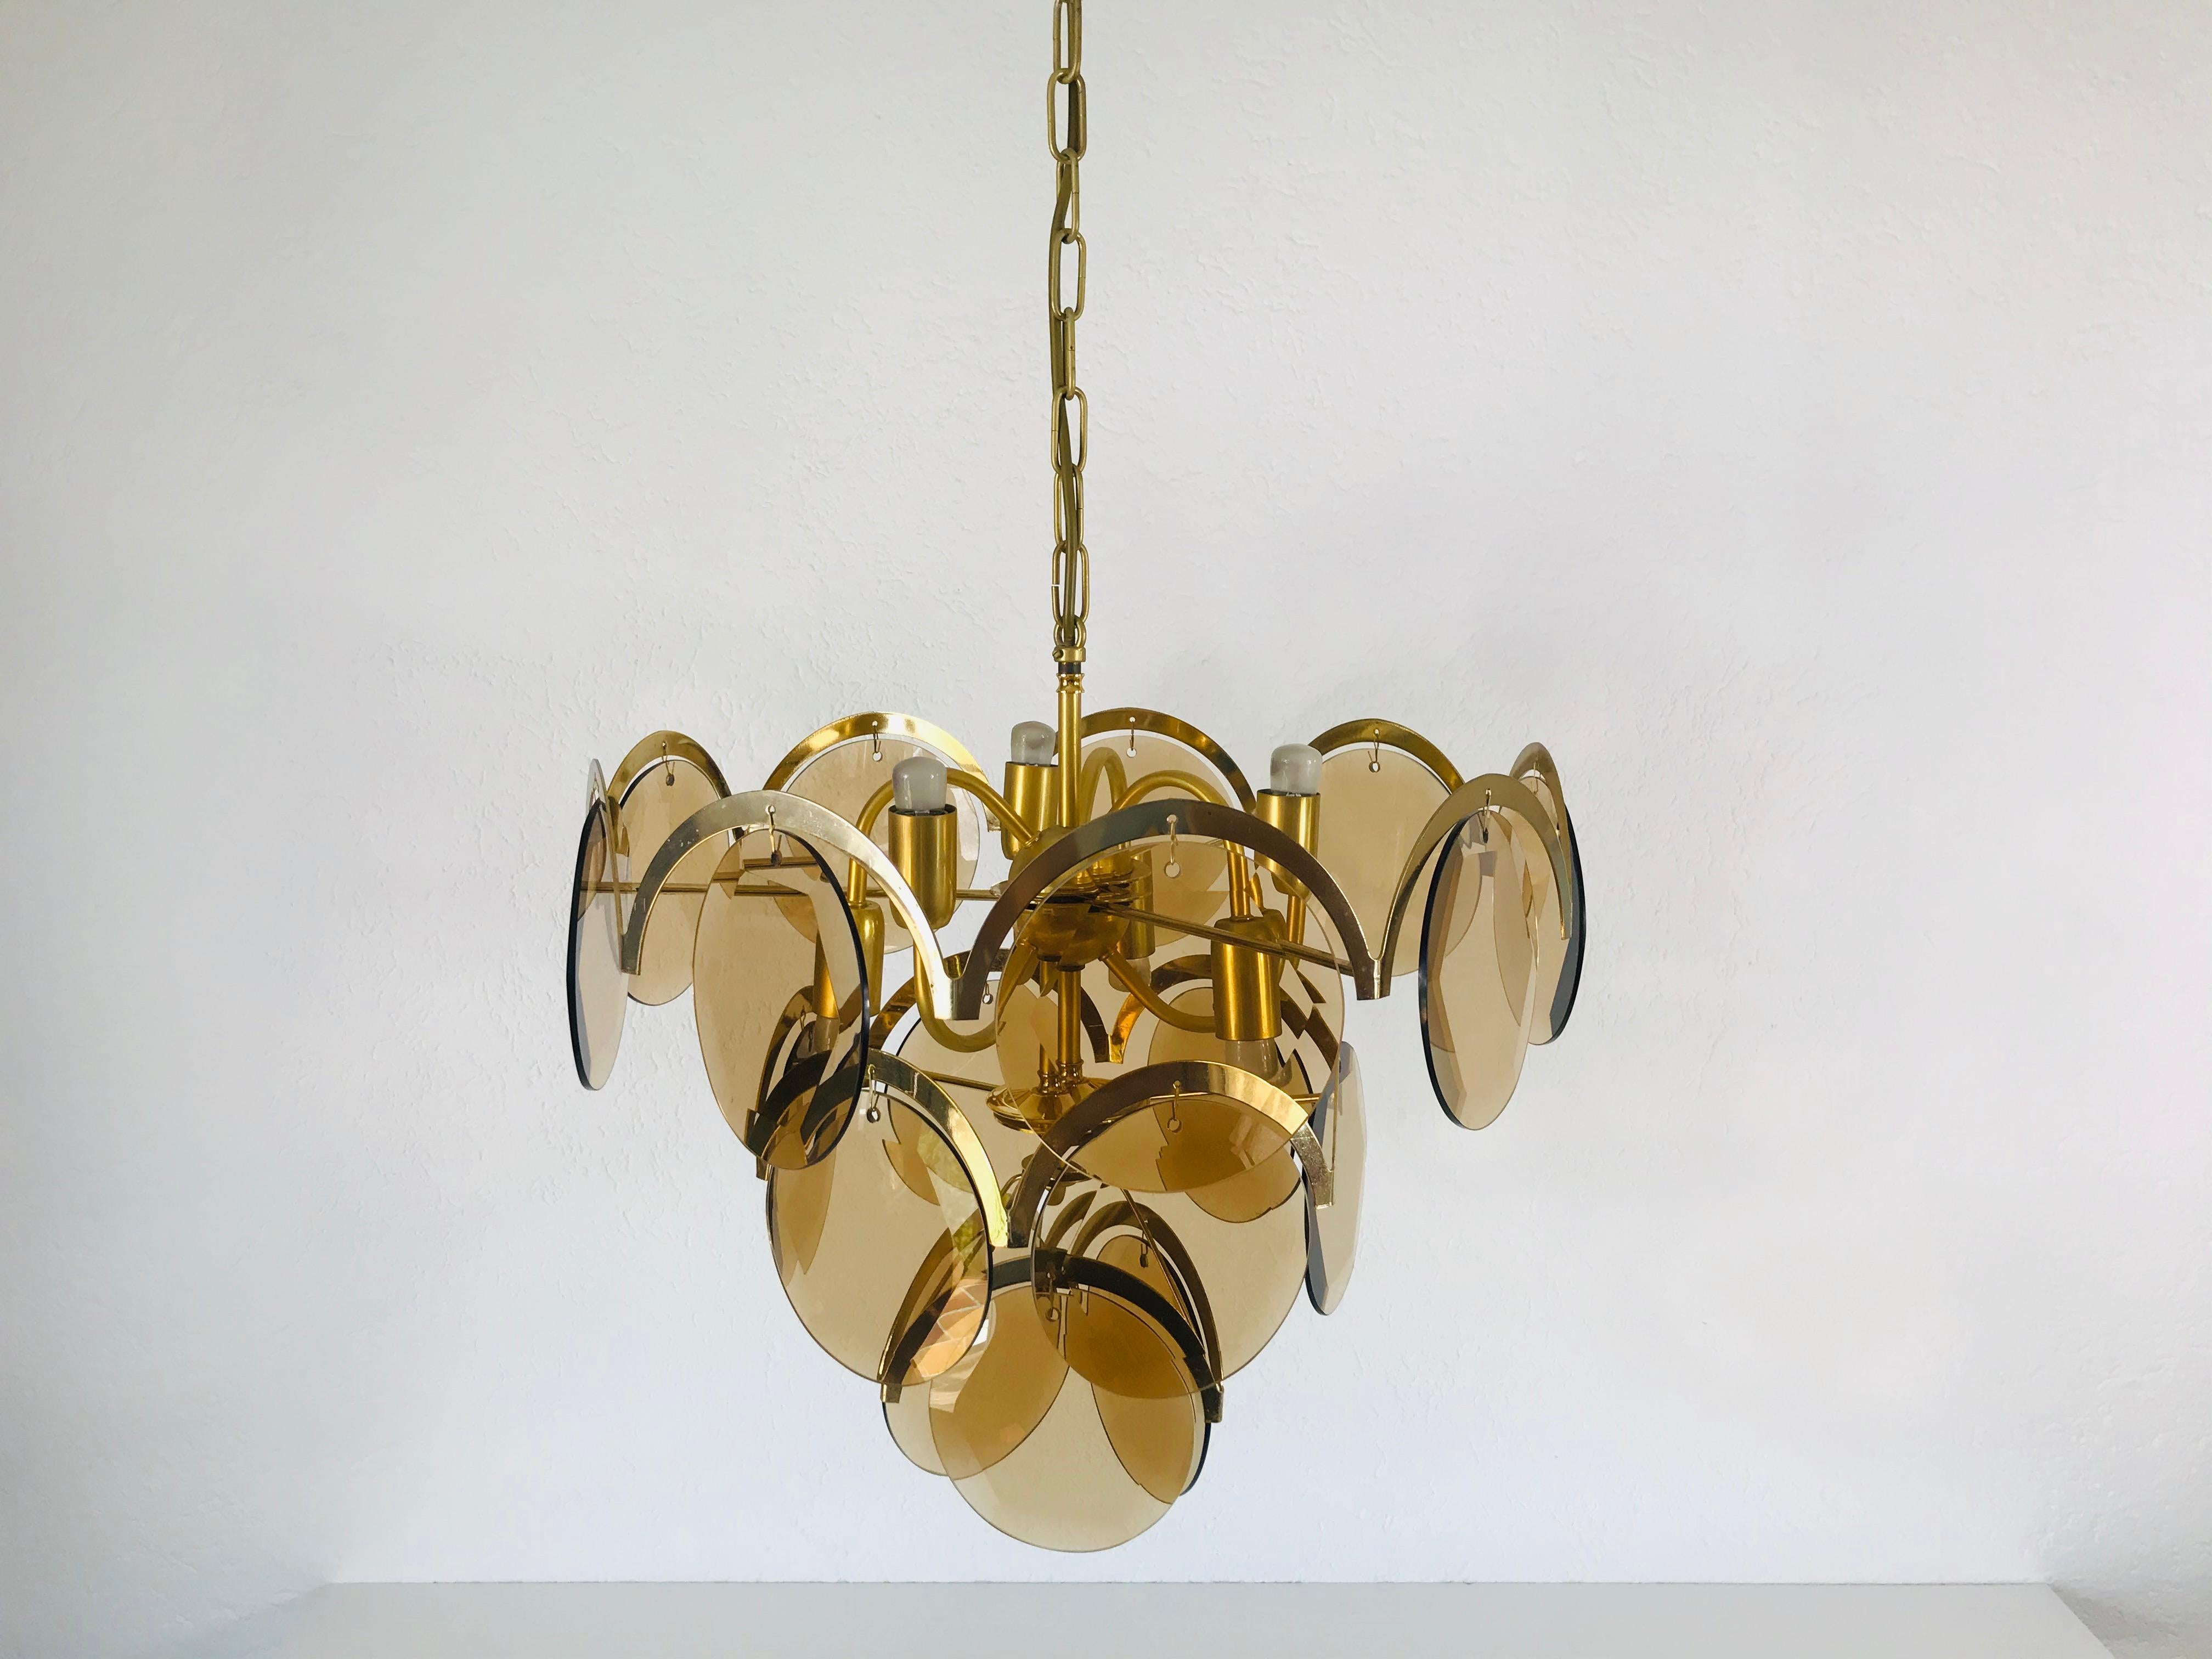 Midcentury Three-Tier Brass and Glass Chandelier by Vistosi, 1960s For Sale 7